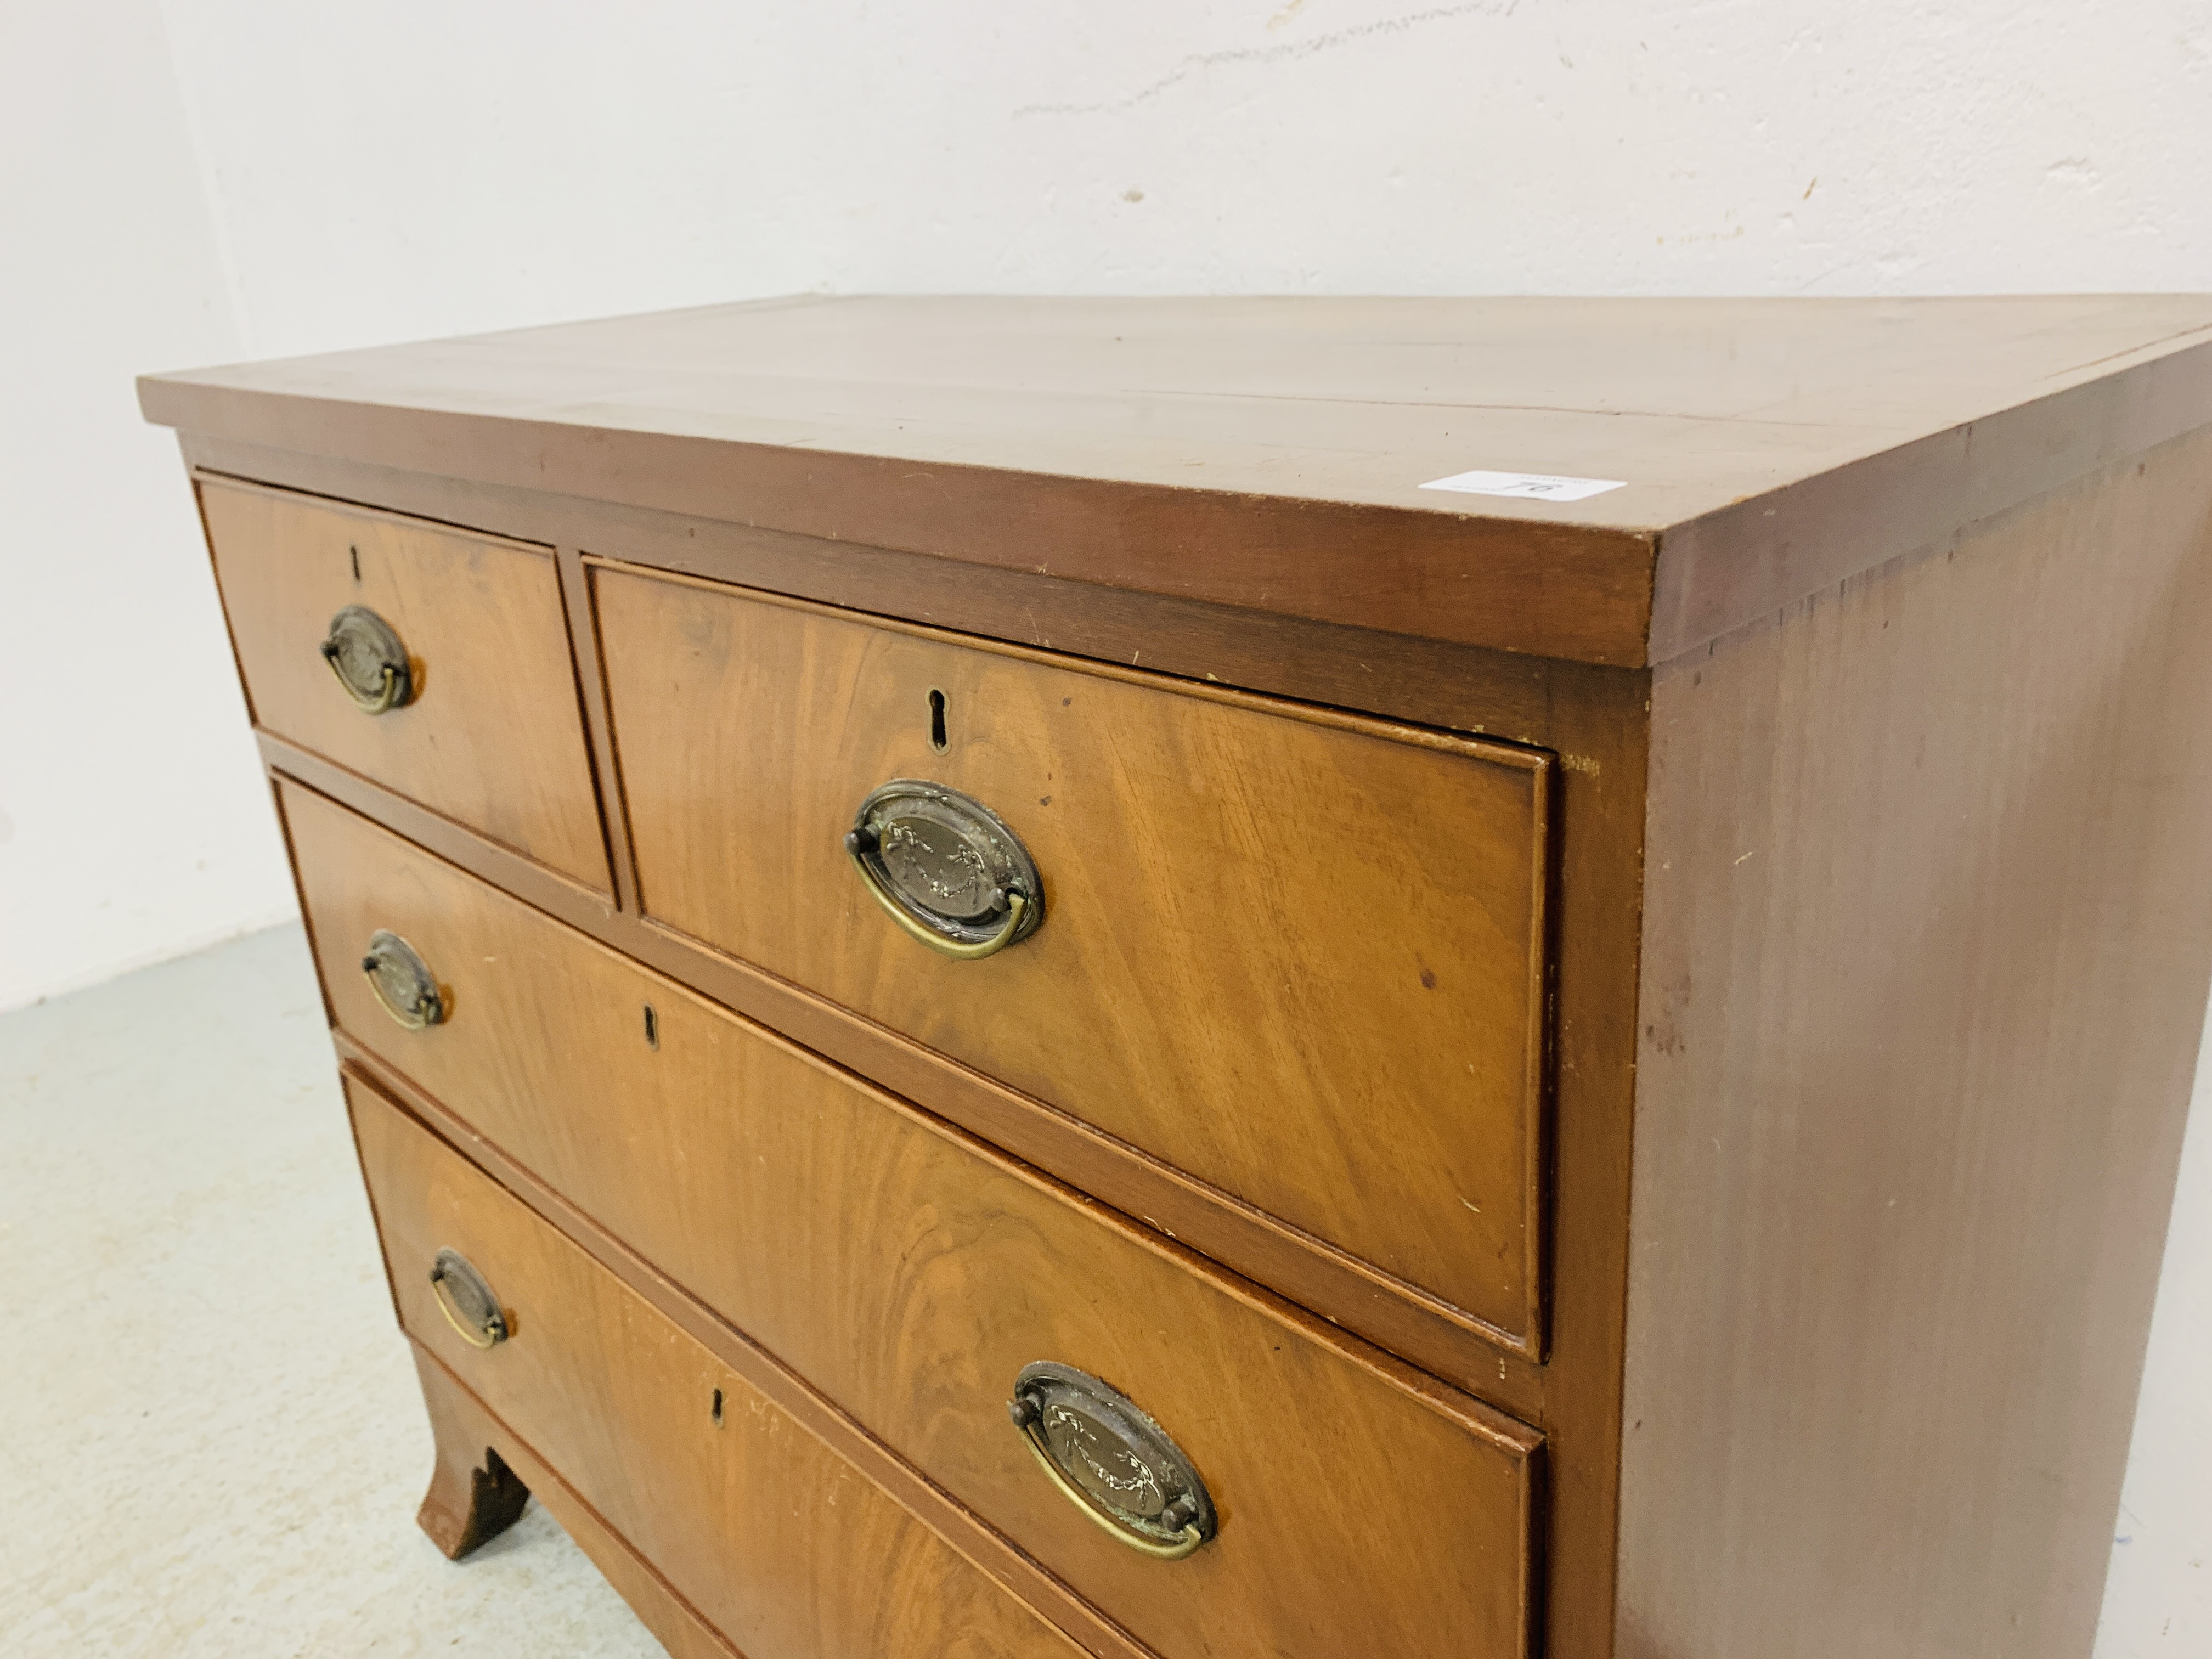 AN EARLY C19TH EDWARDIAN TWO OVER TWO DRAWER CHEST WITH BRASS HANDLES - W 91CM. D 44CM. H 80CM. - Image 5 of 8